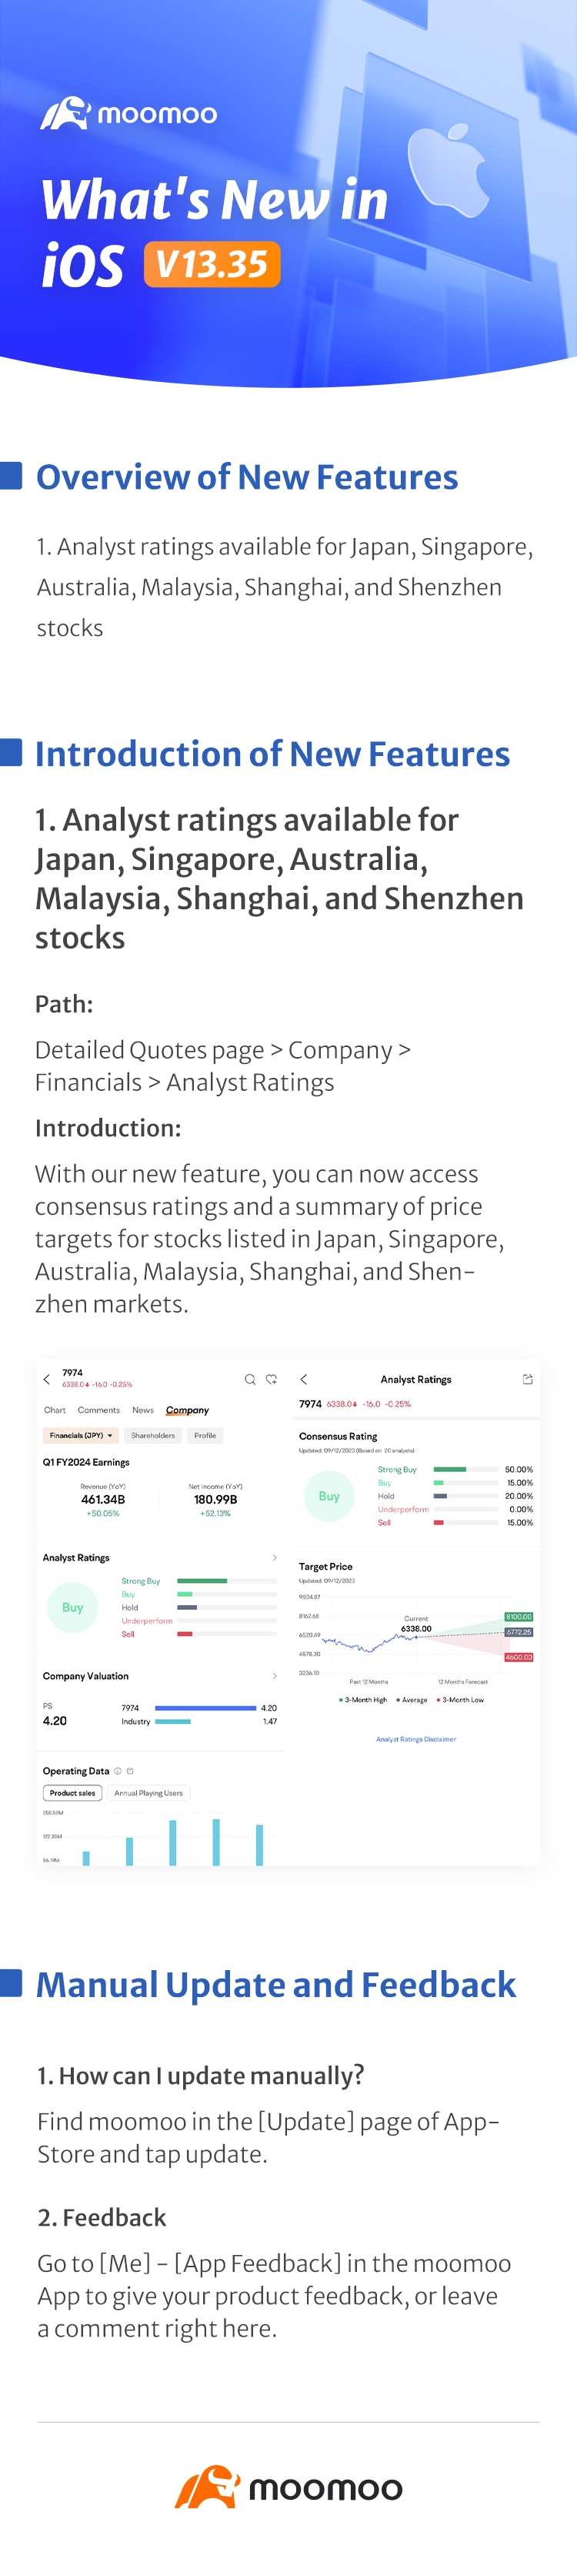 What's New: Analyst ratings available for Japan, Singapore, Australia, etc. in iOS v13.35